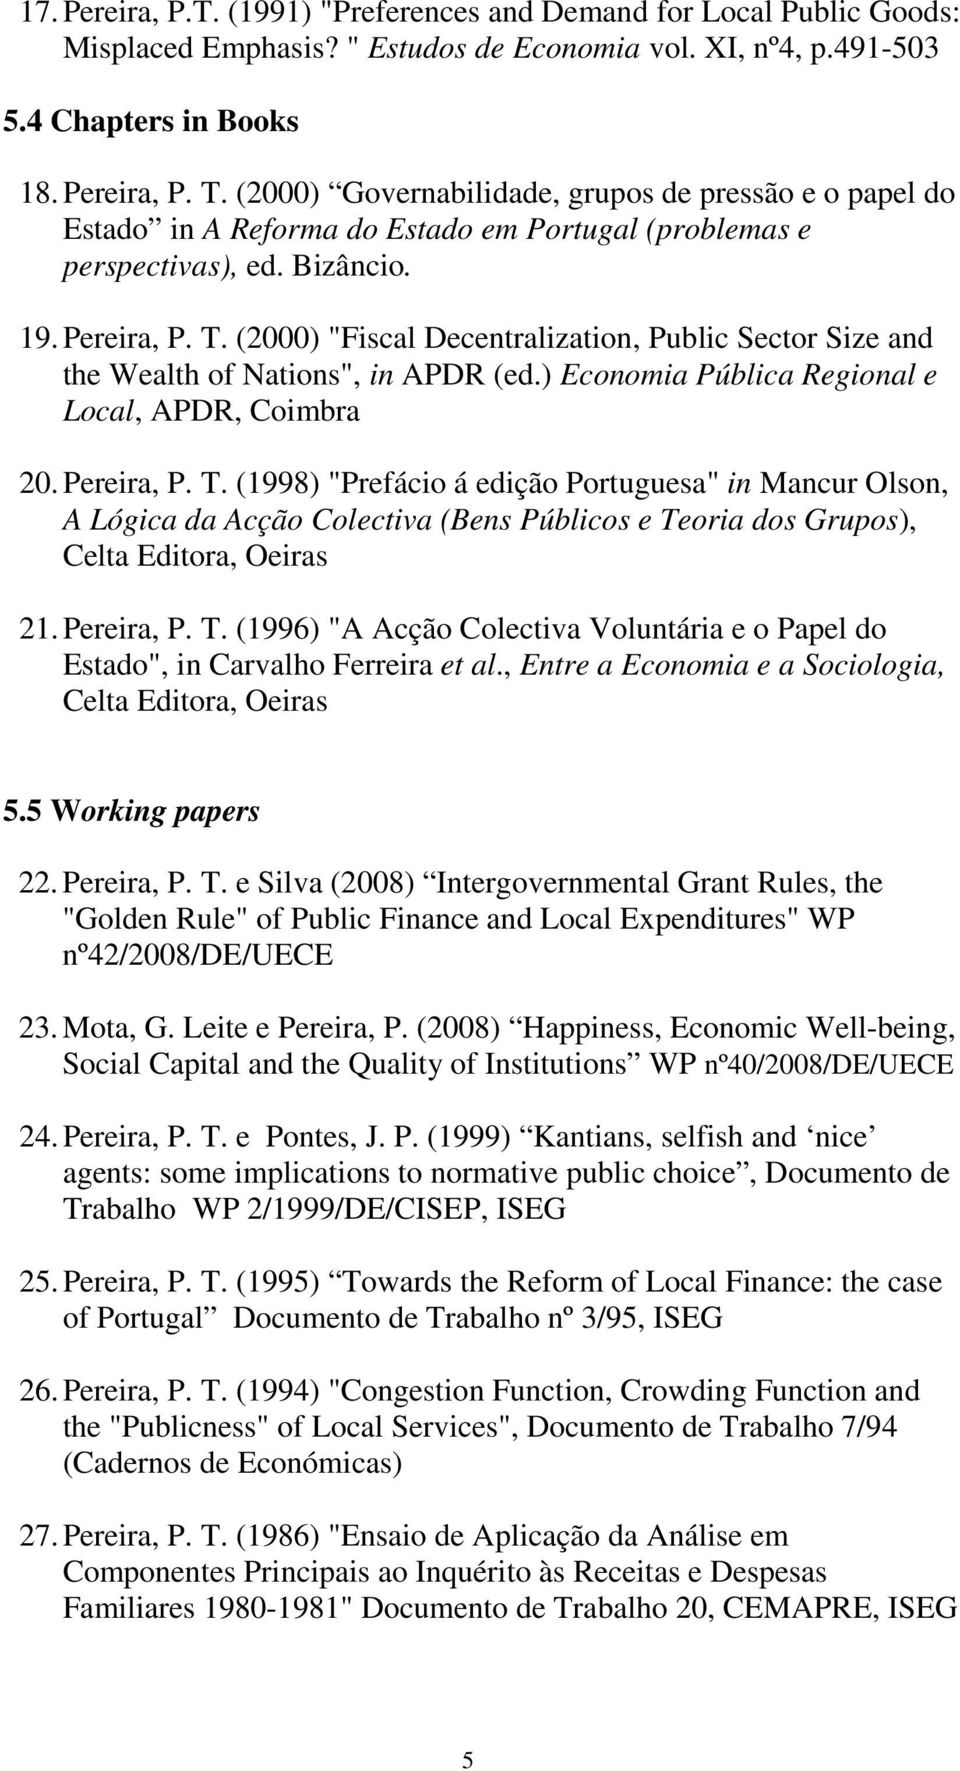 (2000) "Fiscal Decentralization, Public Sector Size and the Wealth of Nations", in APDR (ed.) Economia Pública Regional e Local, APDR, Coimbra 20. Pereira, P. T.